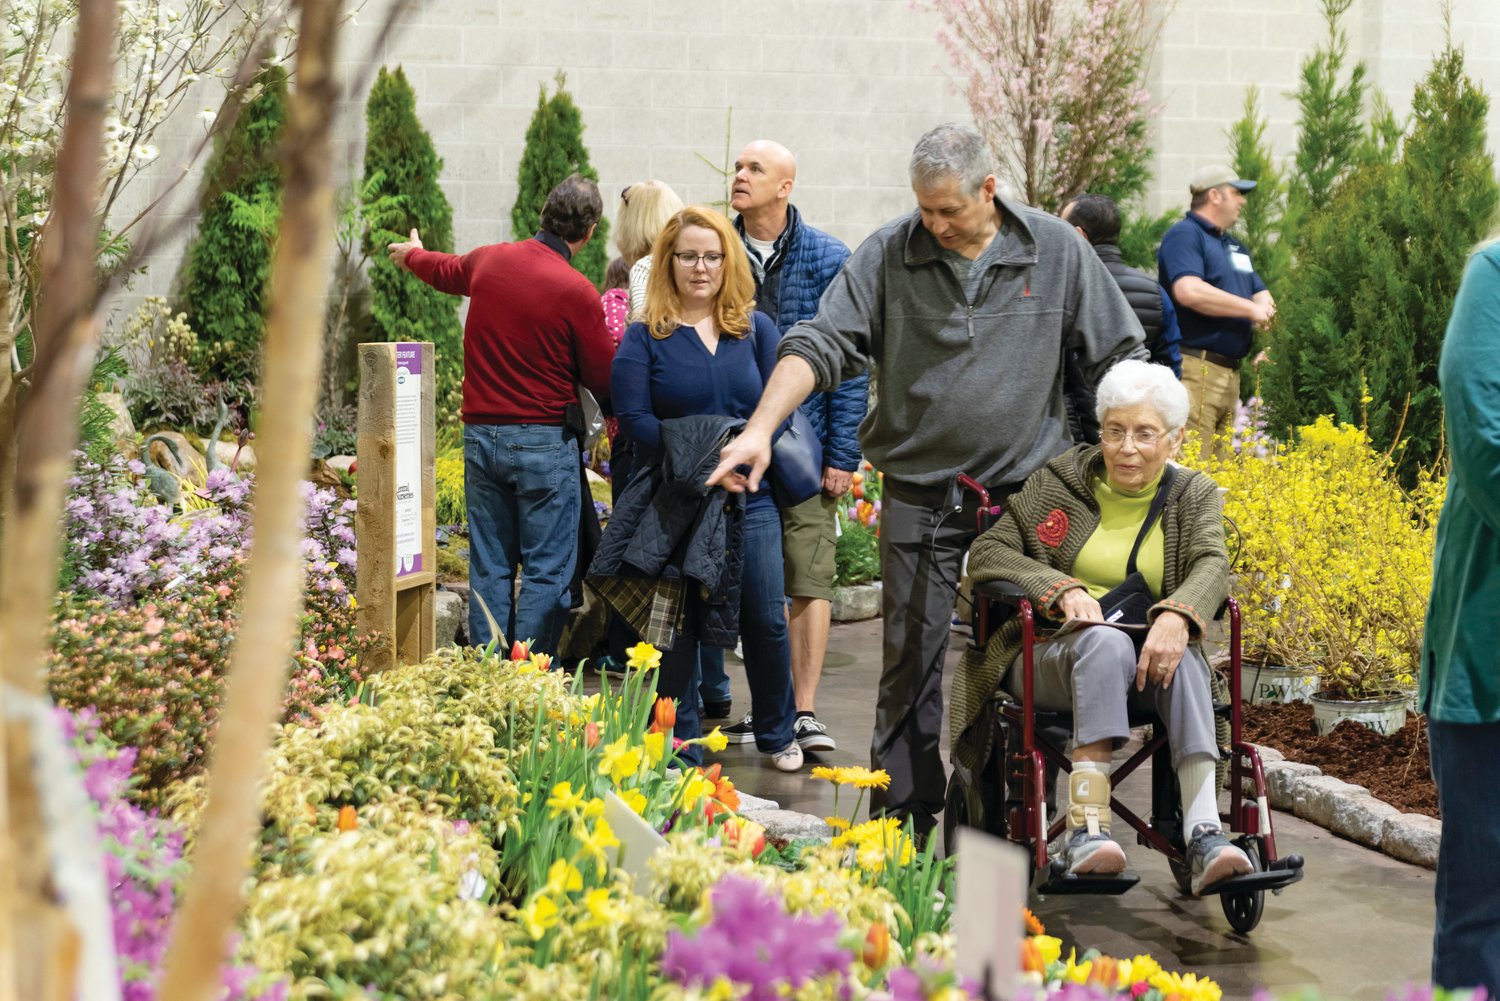 SPRING IN FULL BLOOM: Individuals tour the RI Home Show’s garden experience from past years. This April, Central Nurseries of Johnston will present a “Gardens of the World” garden tour for visitors.